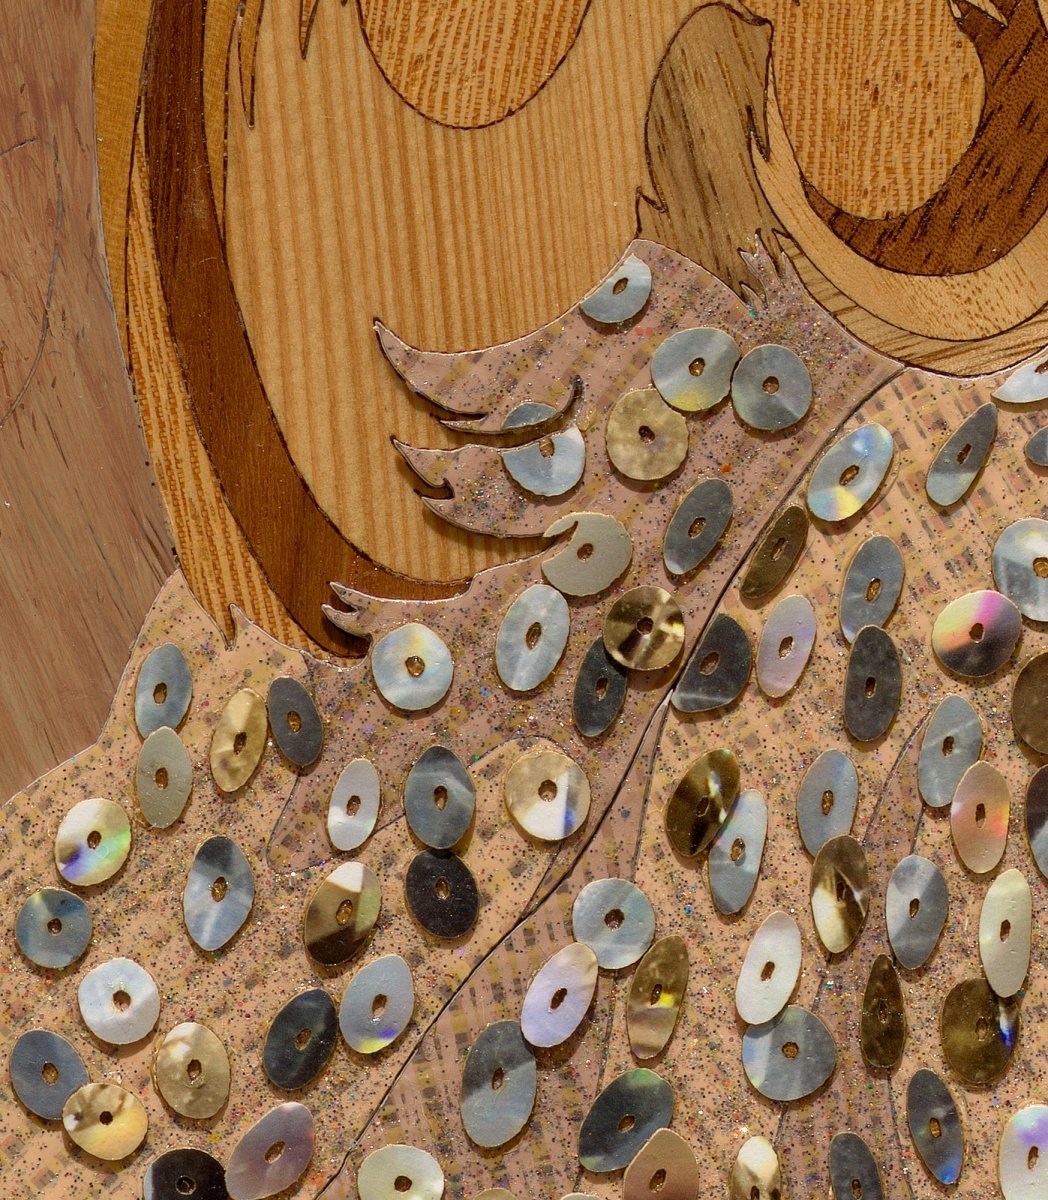 Detail image of At the Wedding shows the many materials Taylor combines in her hybrid marquetry works.